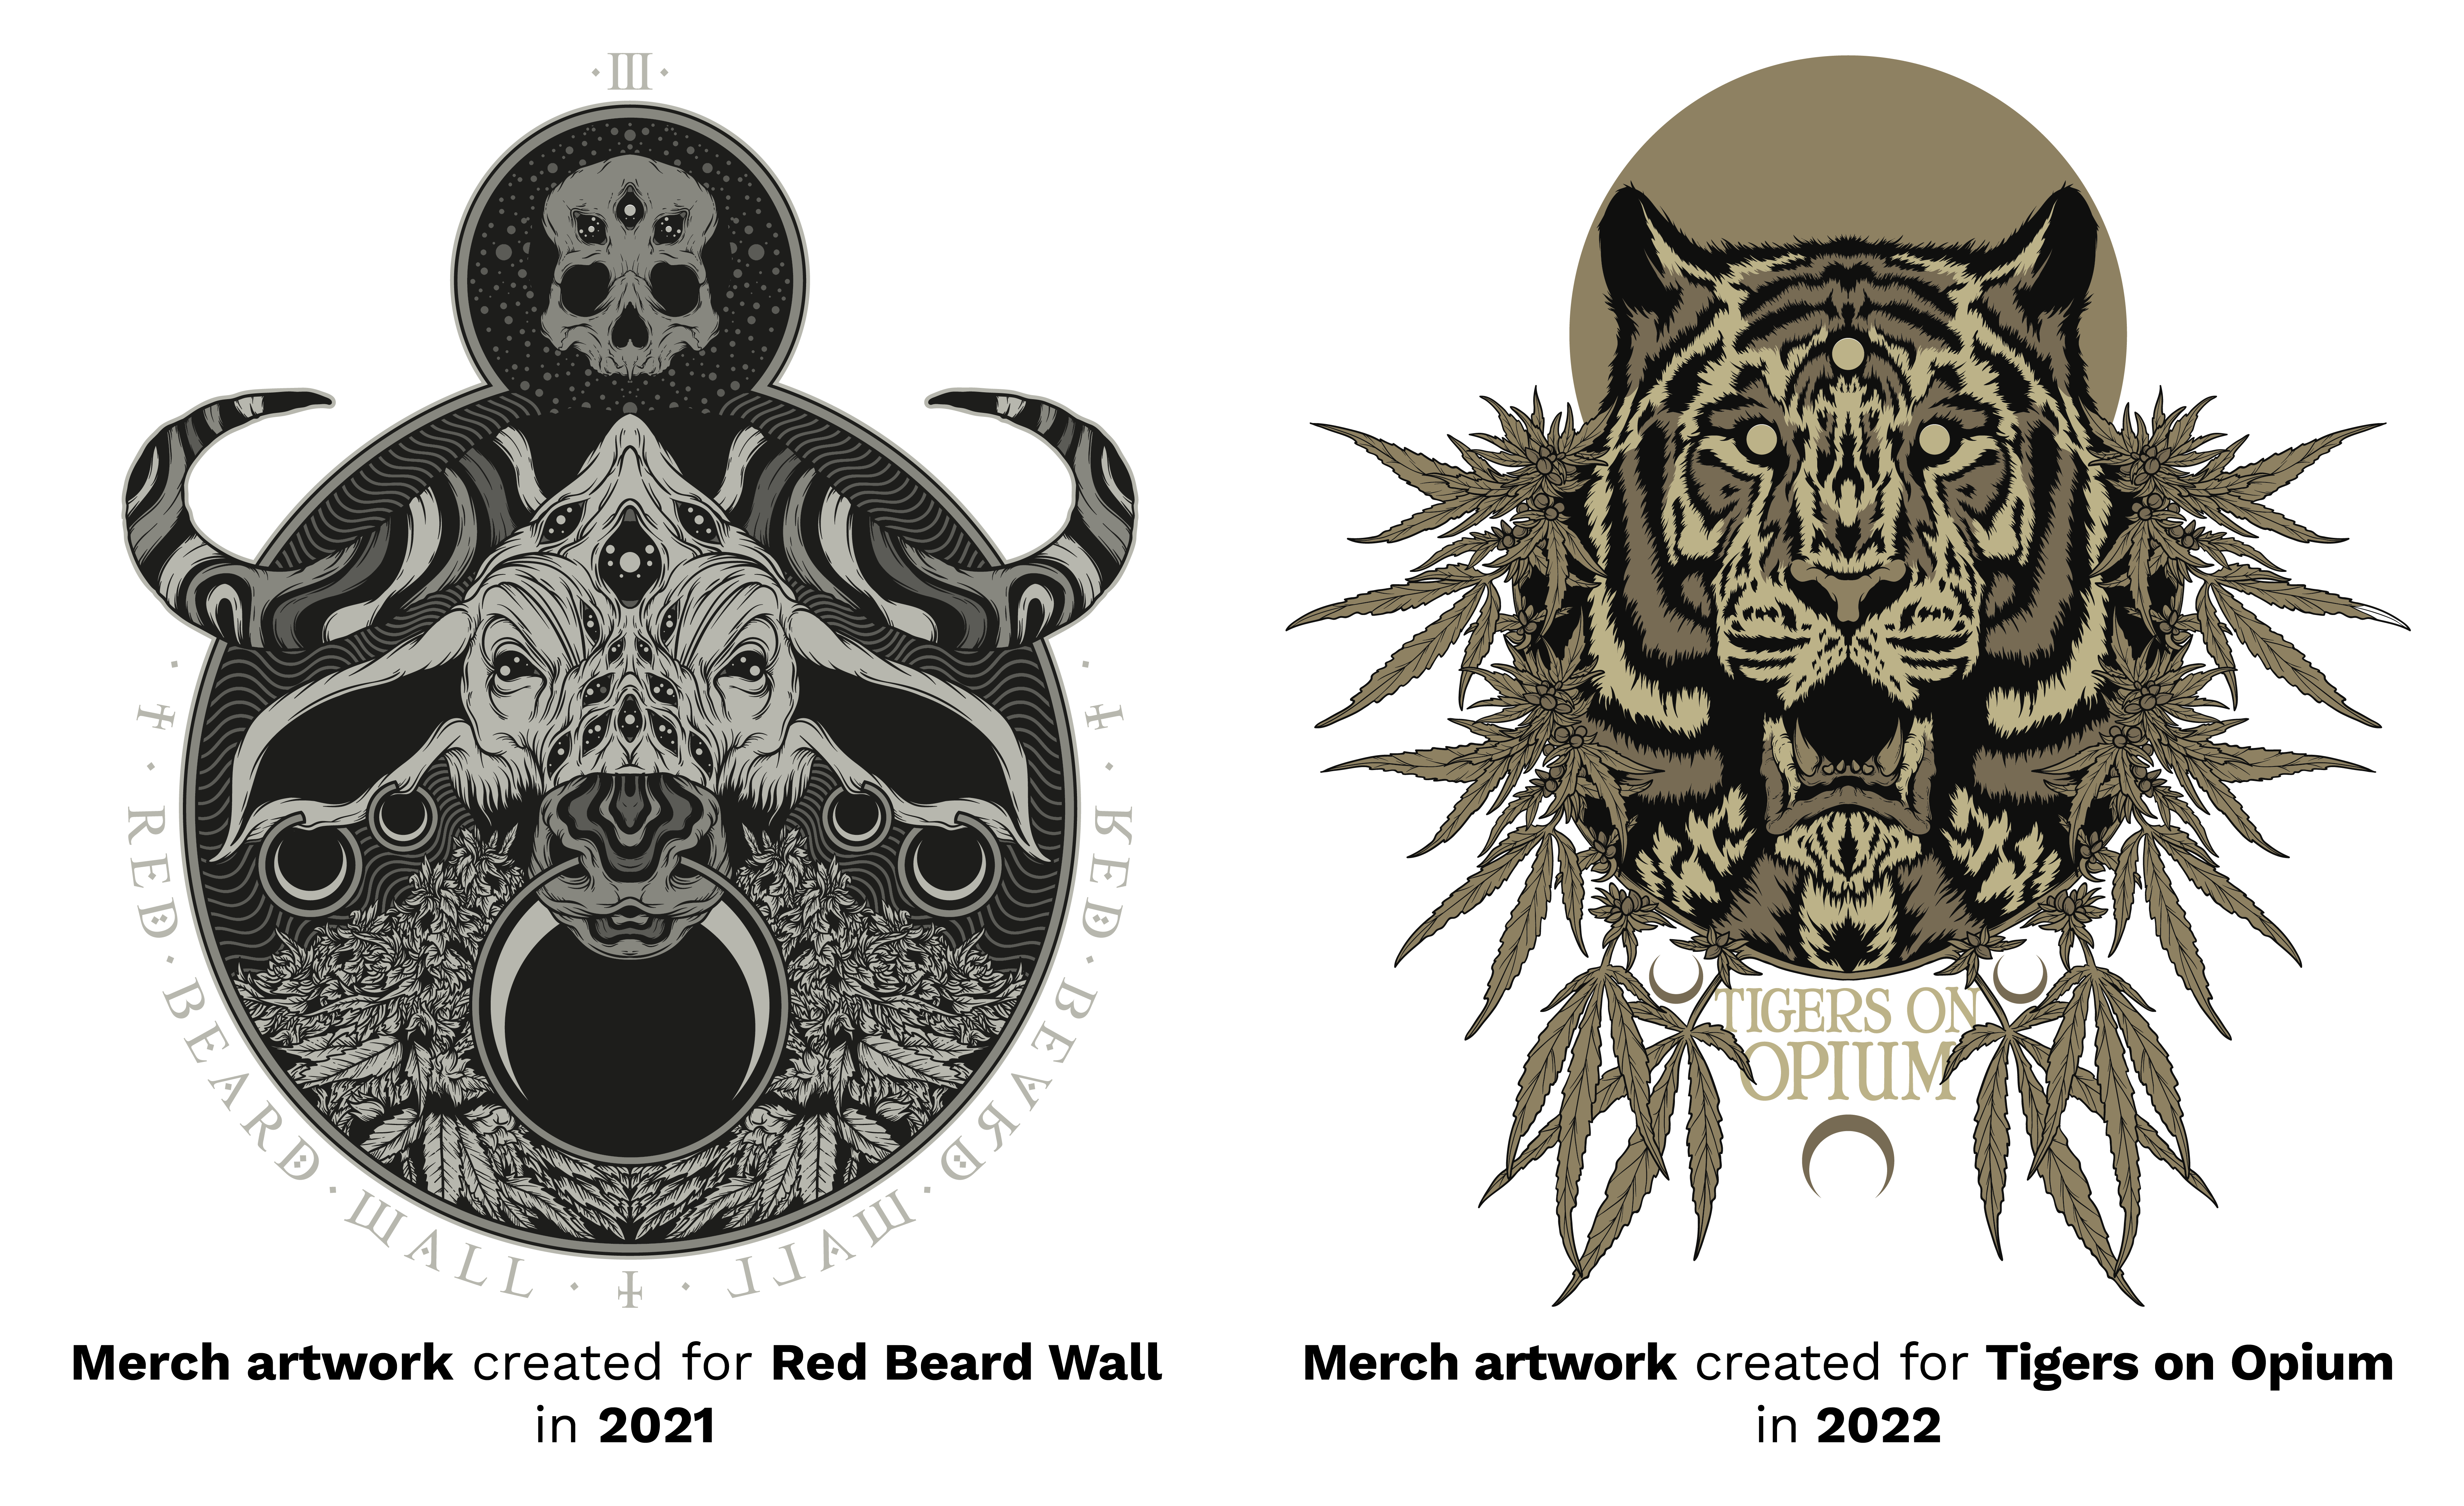 merch artwork for red beard wall and merch artworks created for tigers on opium